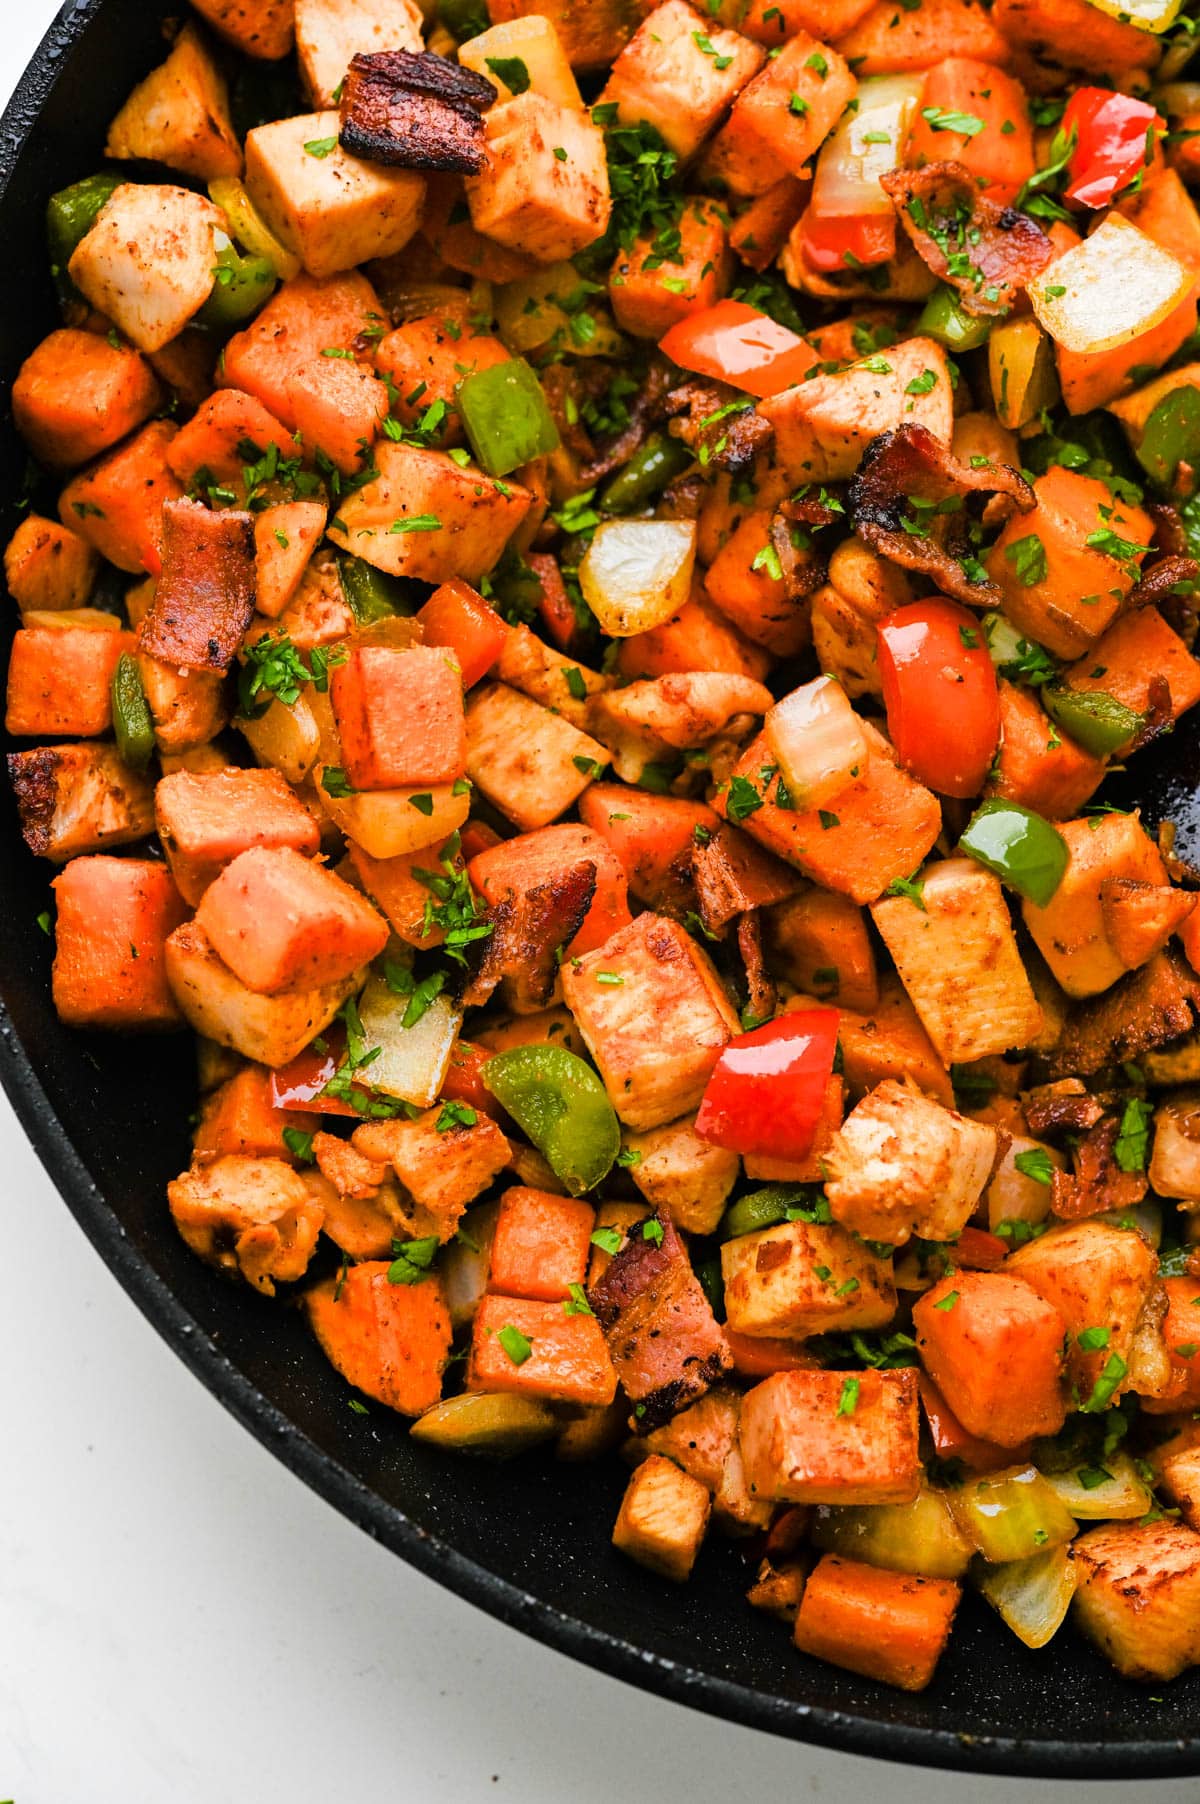 I am combining the sweet potatoes and vegetables with the turkey mixture. 